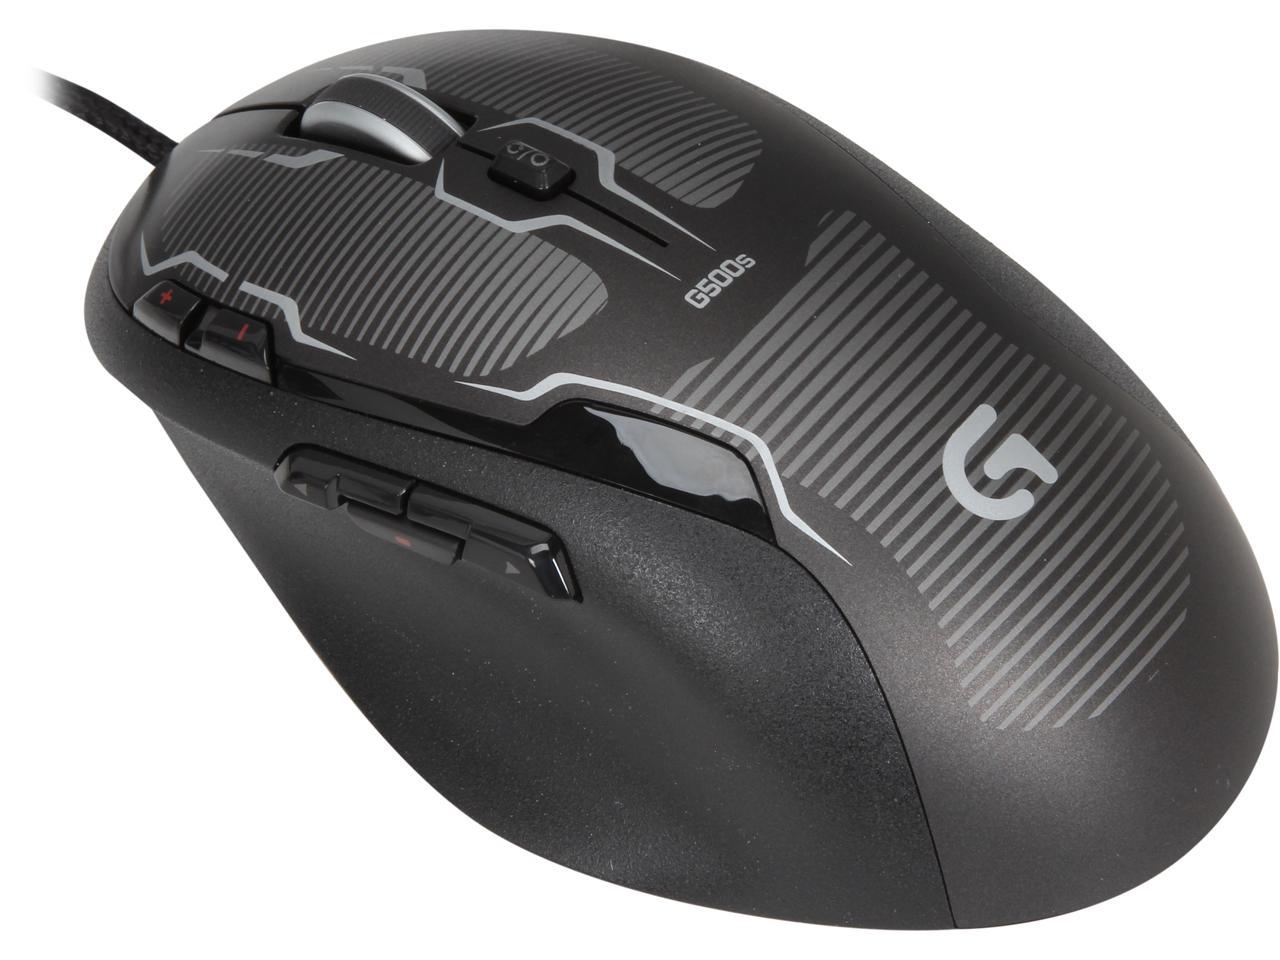 NUOVO Logitech G500s Laser Gaming Mouse 